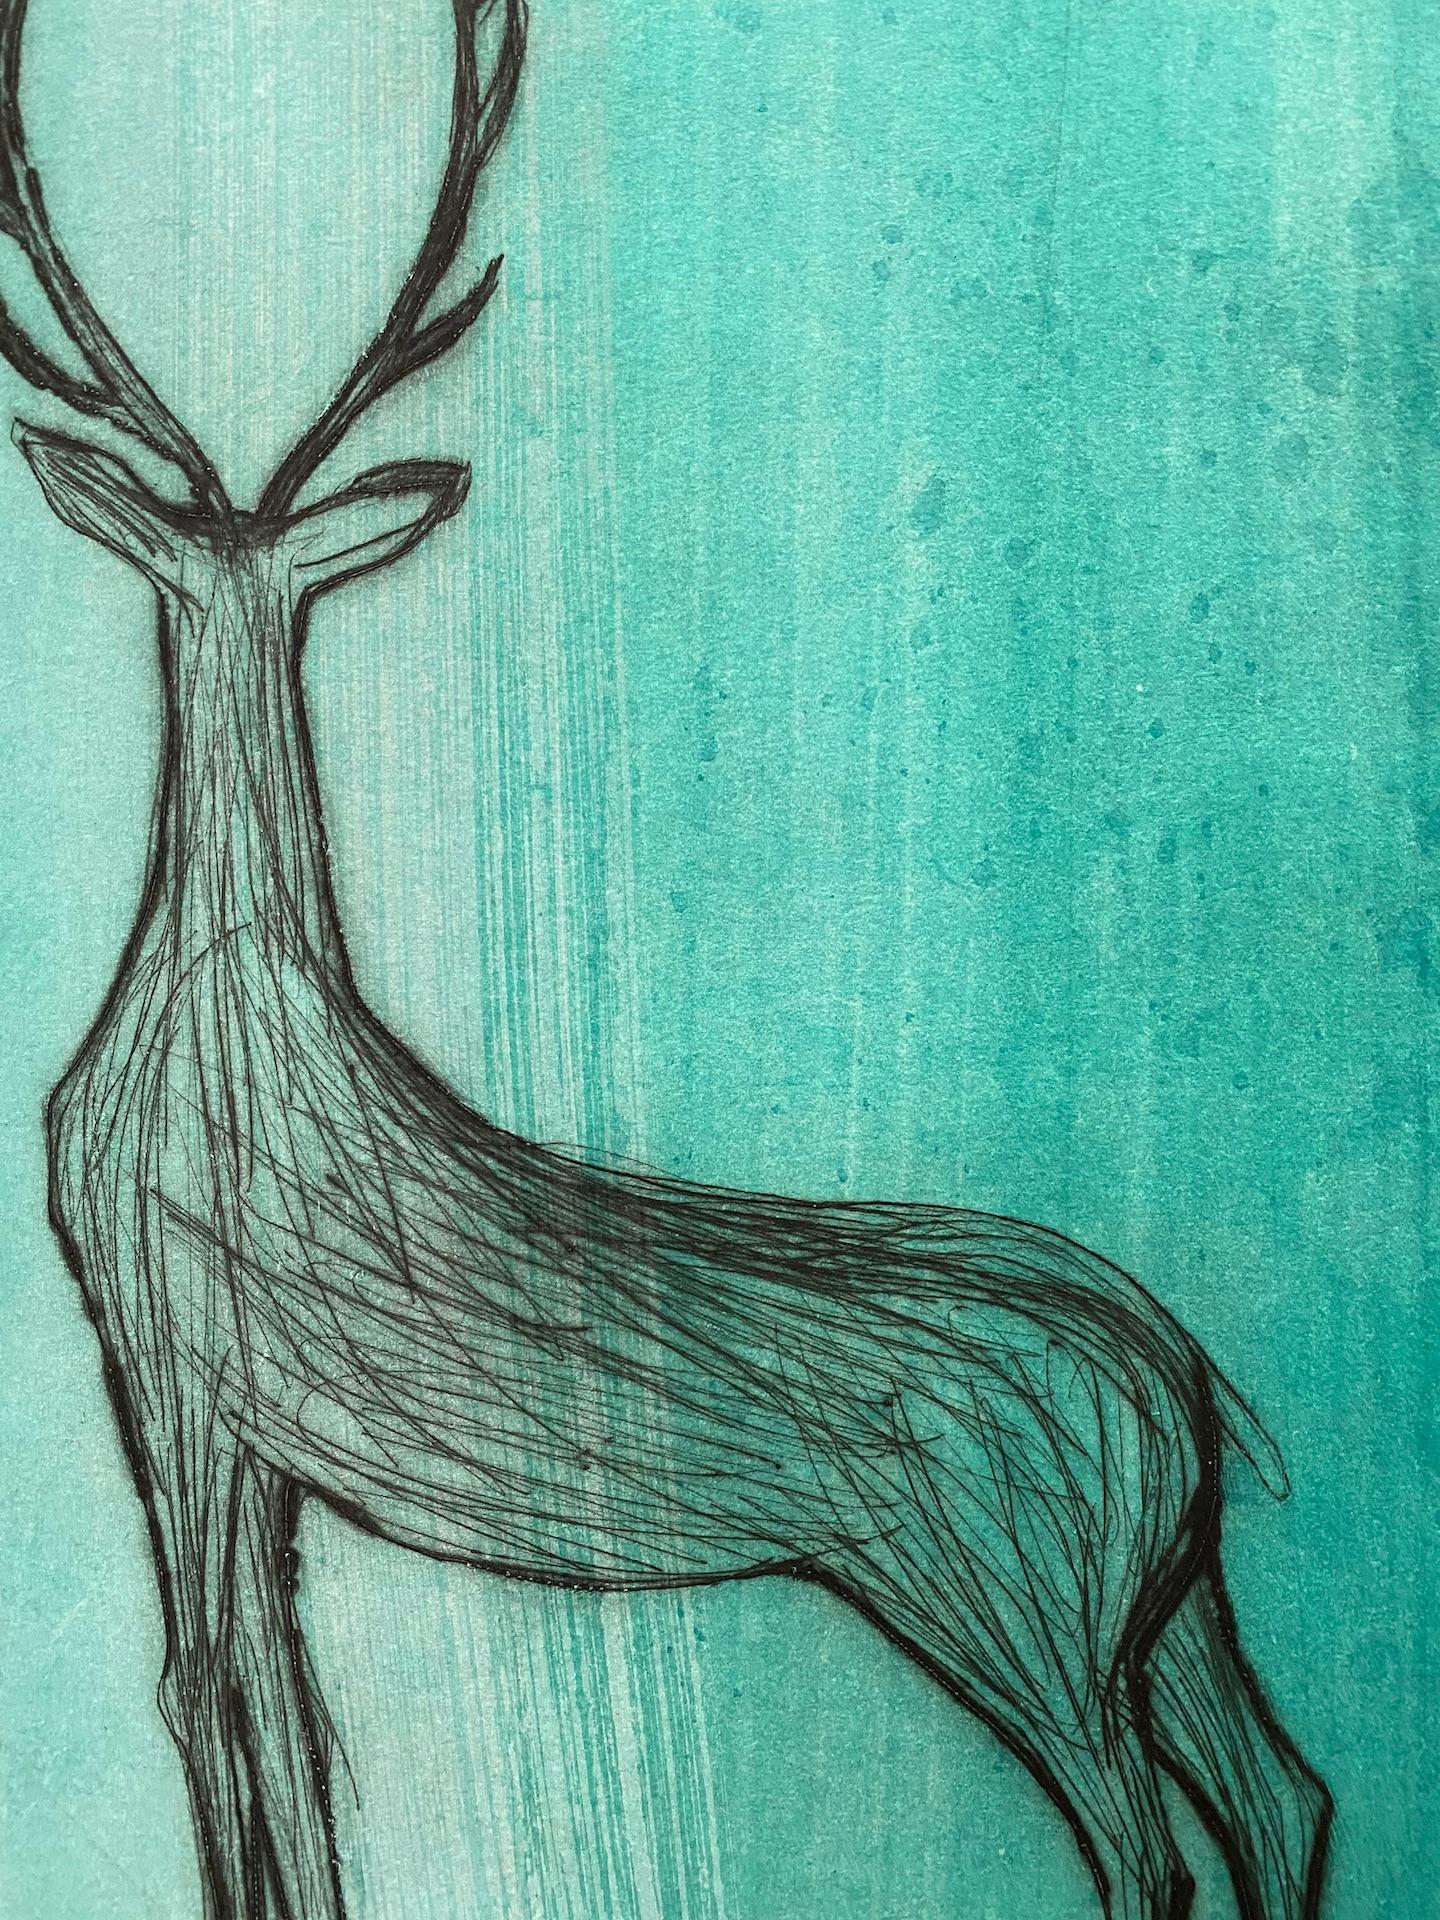 Kate Boxer, Stags Admiring an Emerald Waterfall, Contemporary Art, Animal Art 3